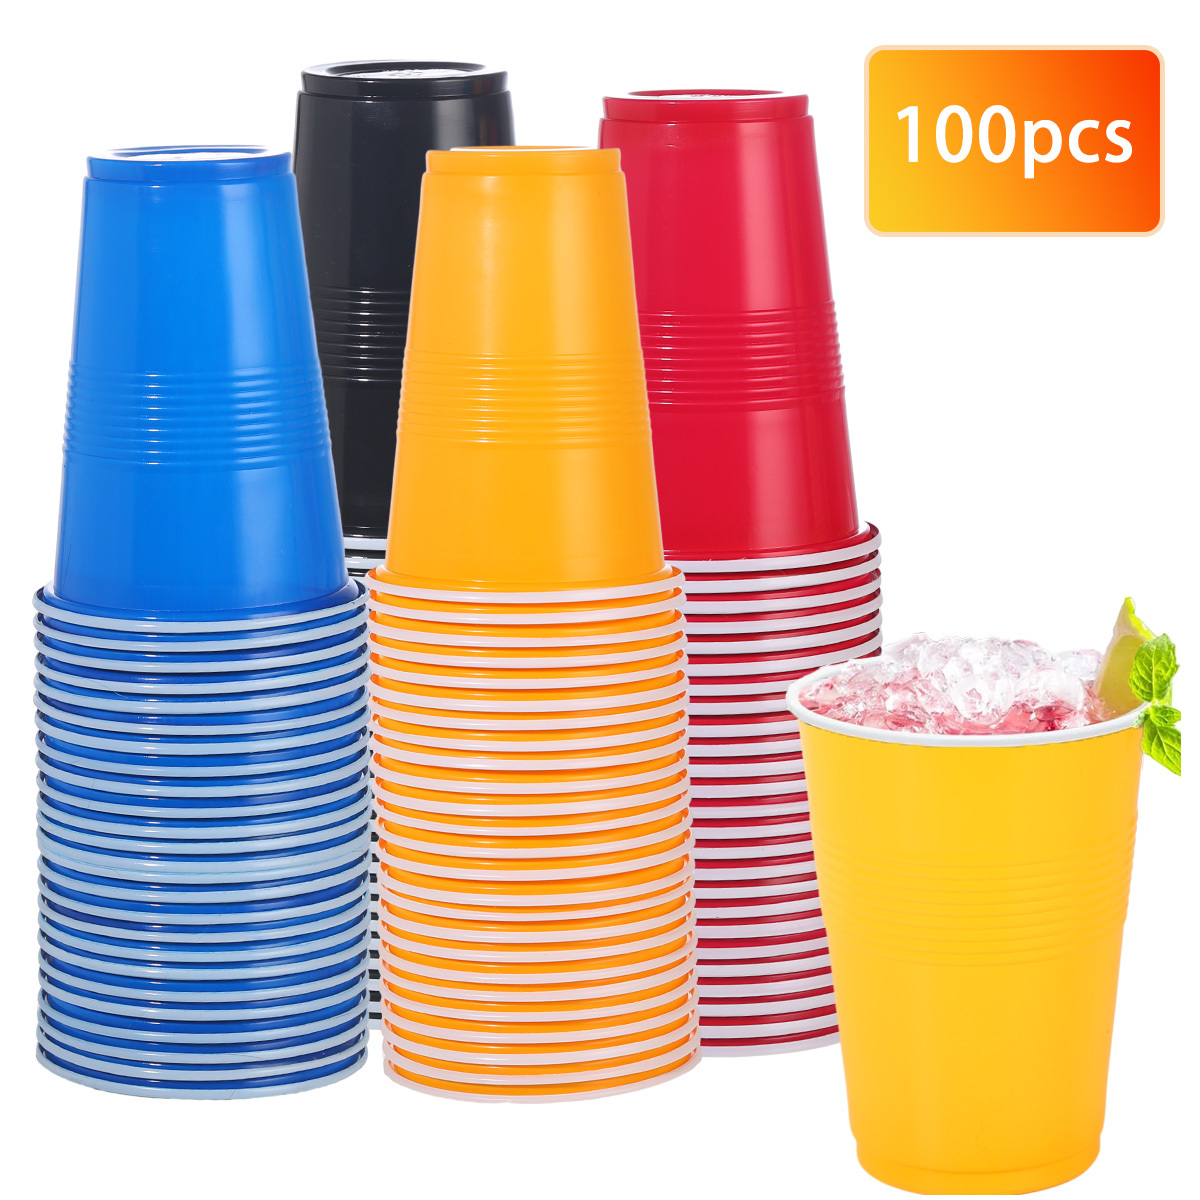 2 Yellow Solo Cups Heavy Plastic Stemmed Party Cups 16oz Brand New